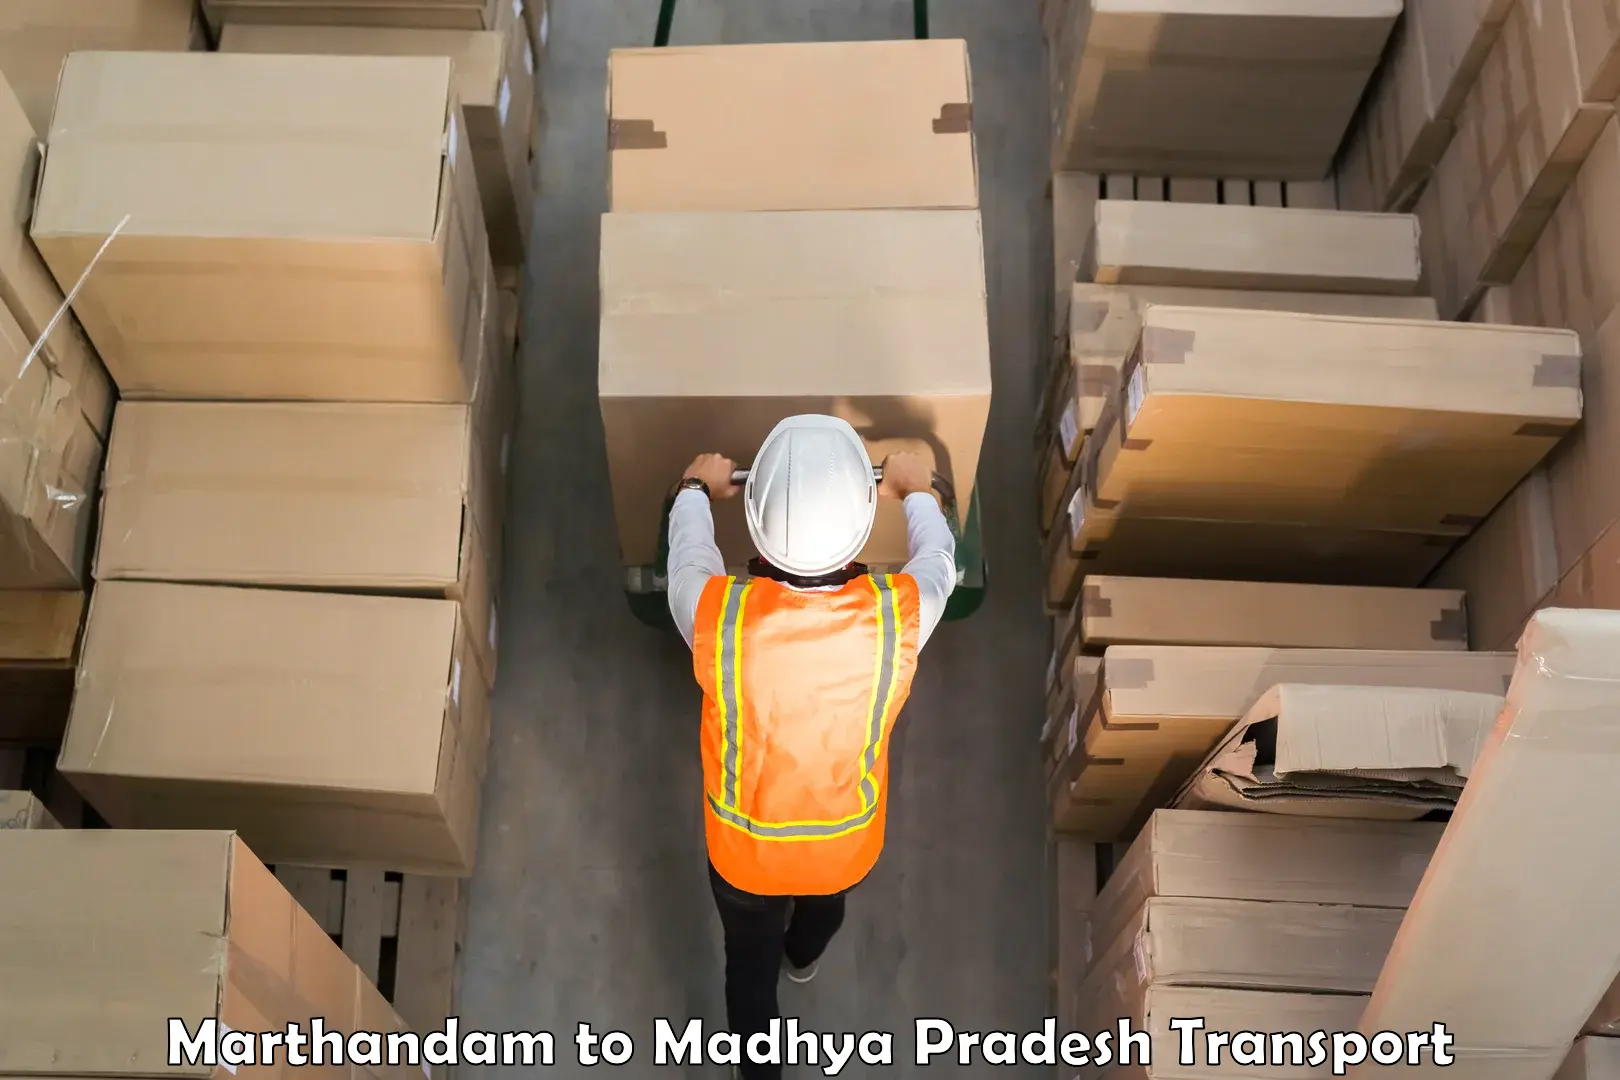 Shipping services Marthandam to IIIT Bhopal